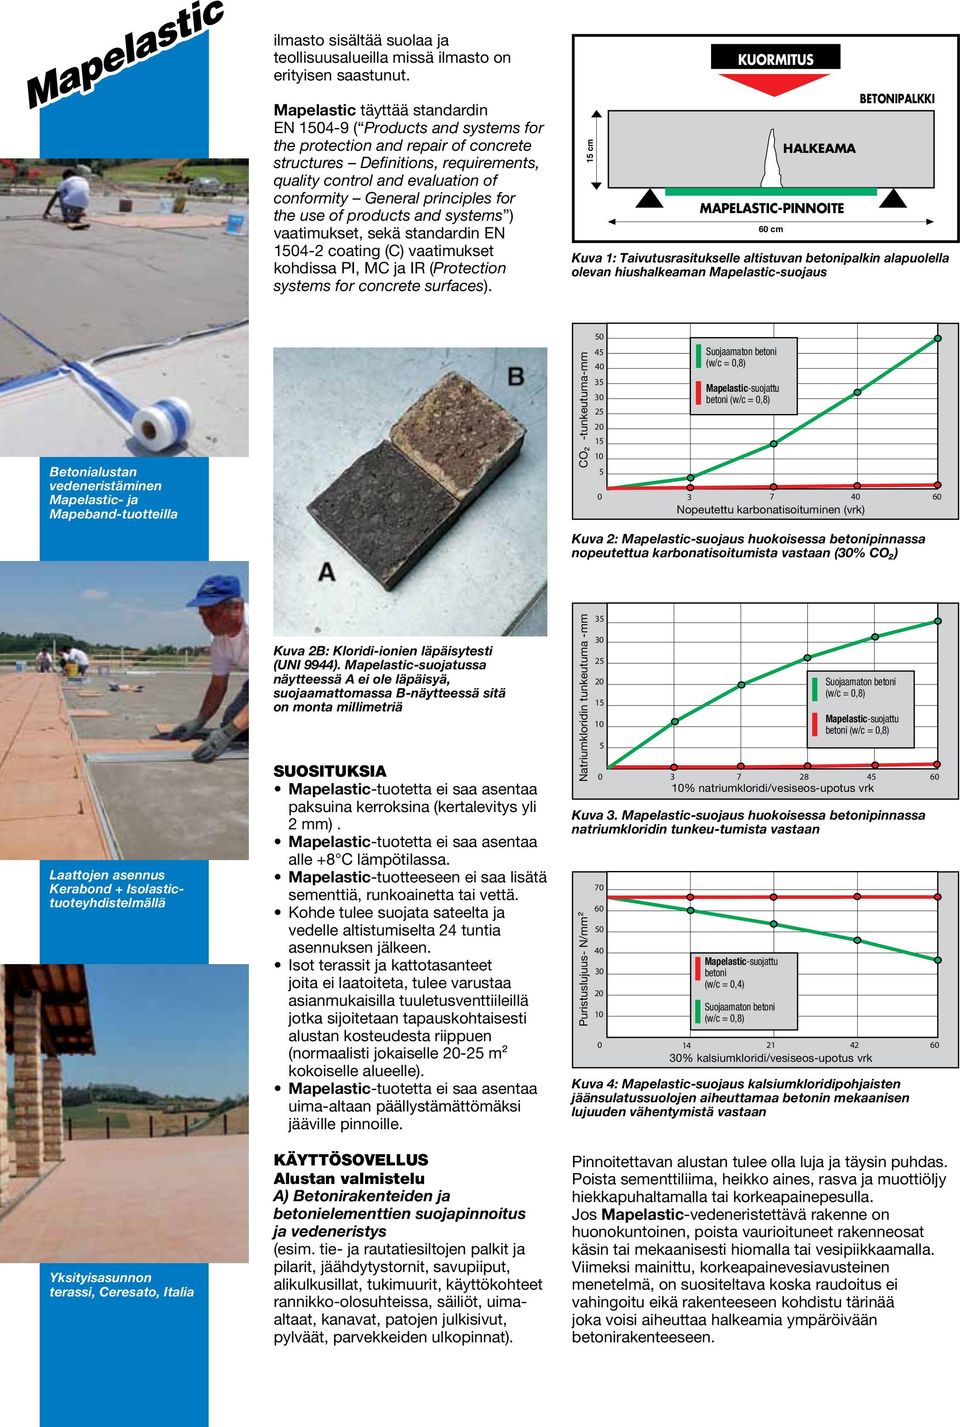 principles for the use of products and systems ) vaatimukset, sekä standardin EN 1504-2 coating (C) vaatimukset kohdissa PI, MC ja IR (Protection systems for concrete surfaces).